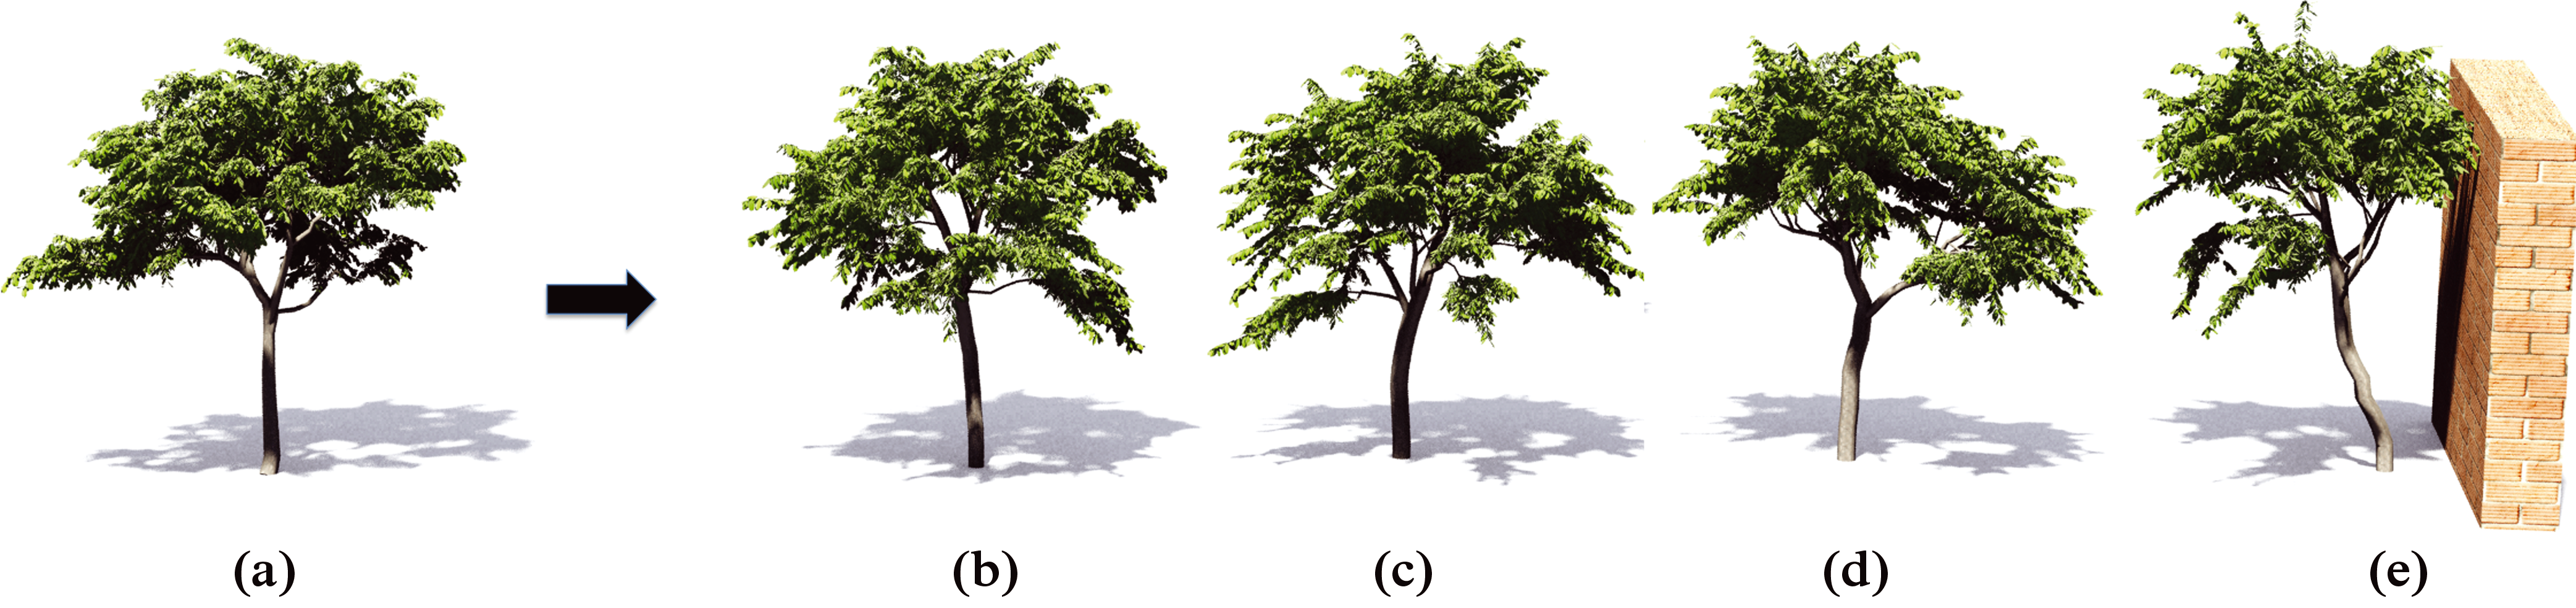 Teaser of Inverse Procedural Modelling of Trees